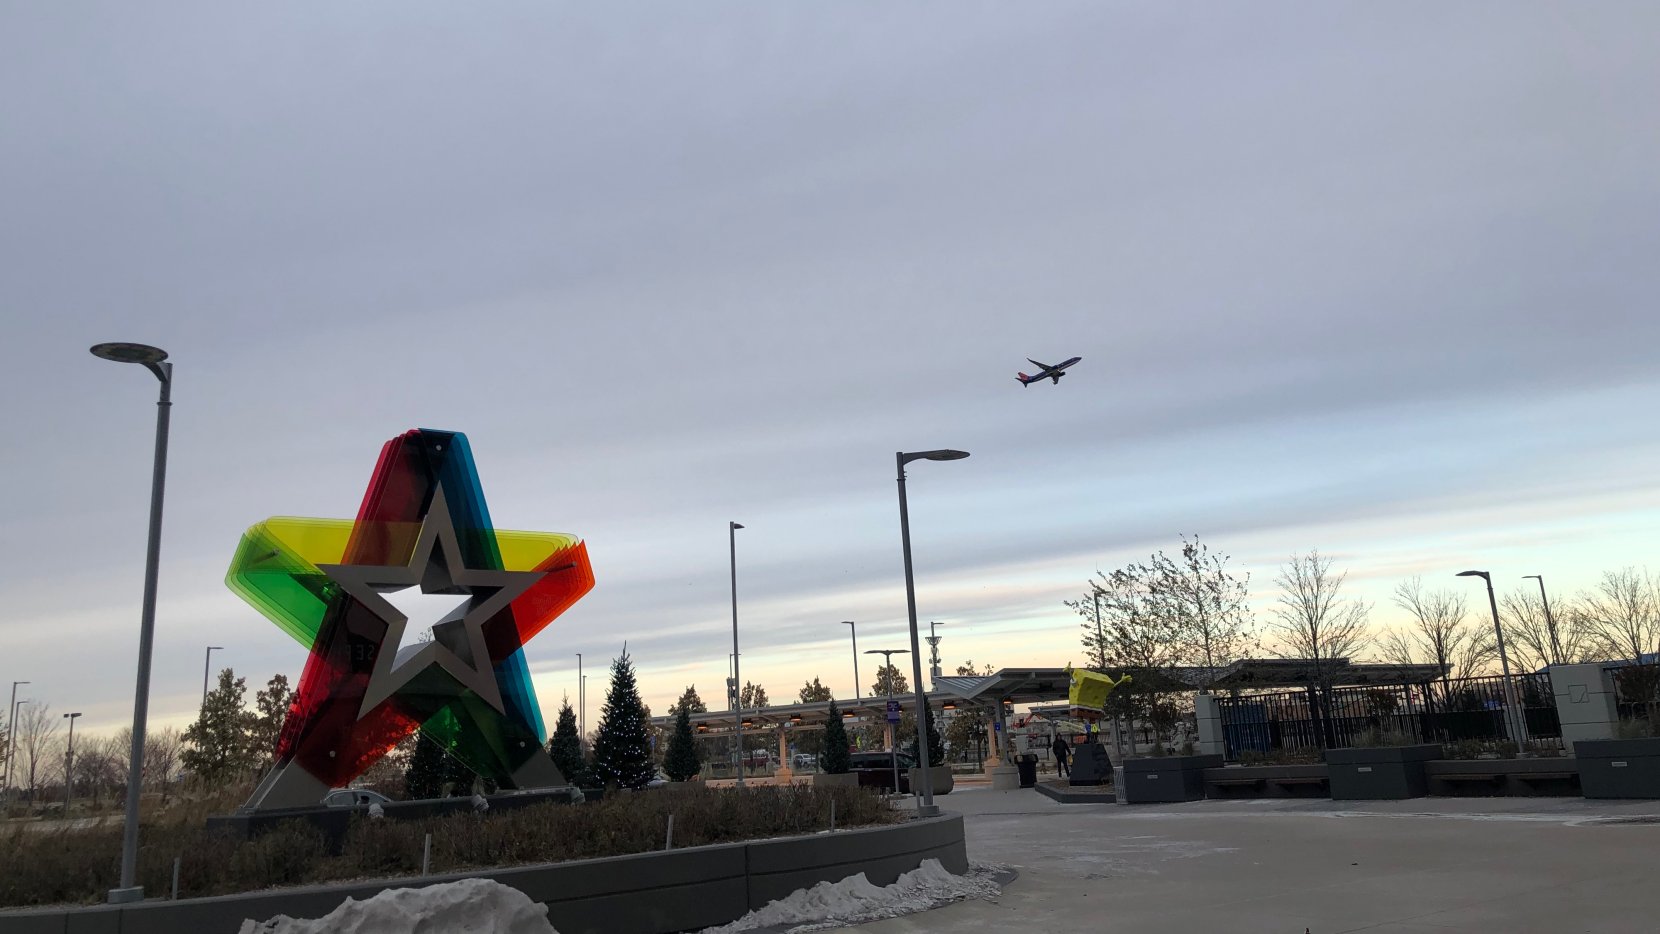 Mall of America sign with a jet taking off in the background.